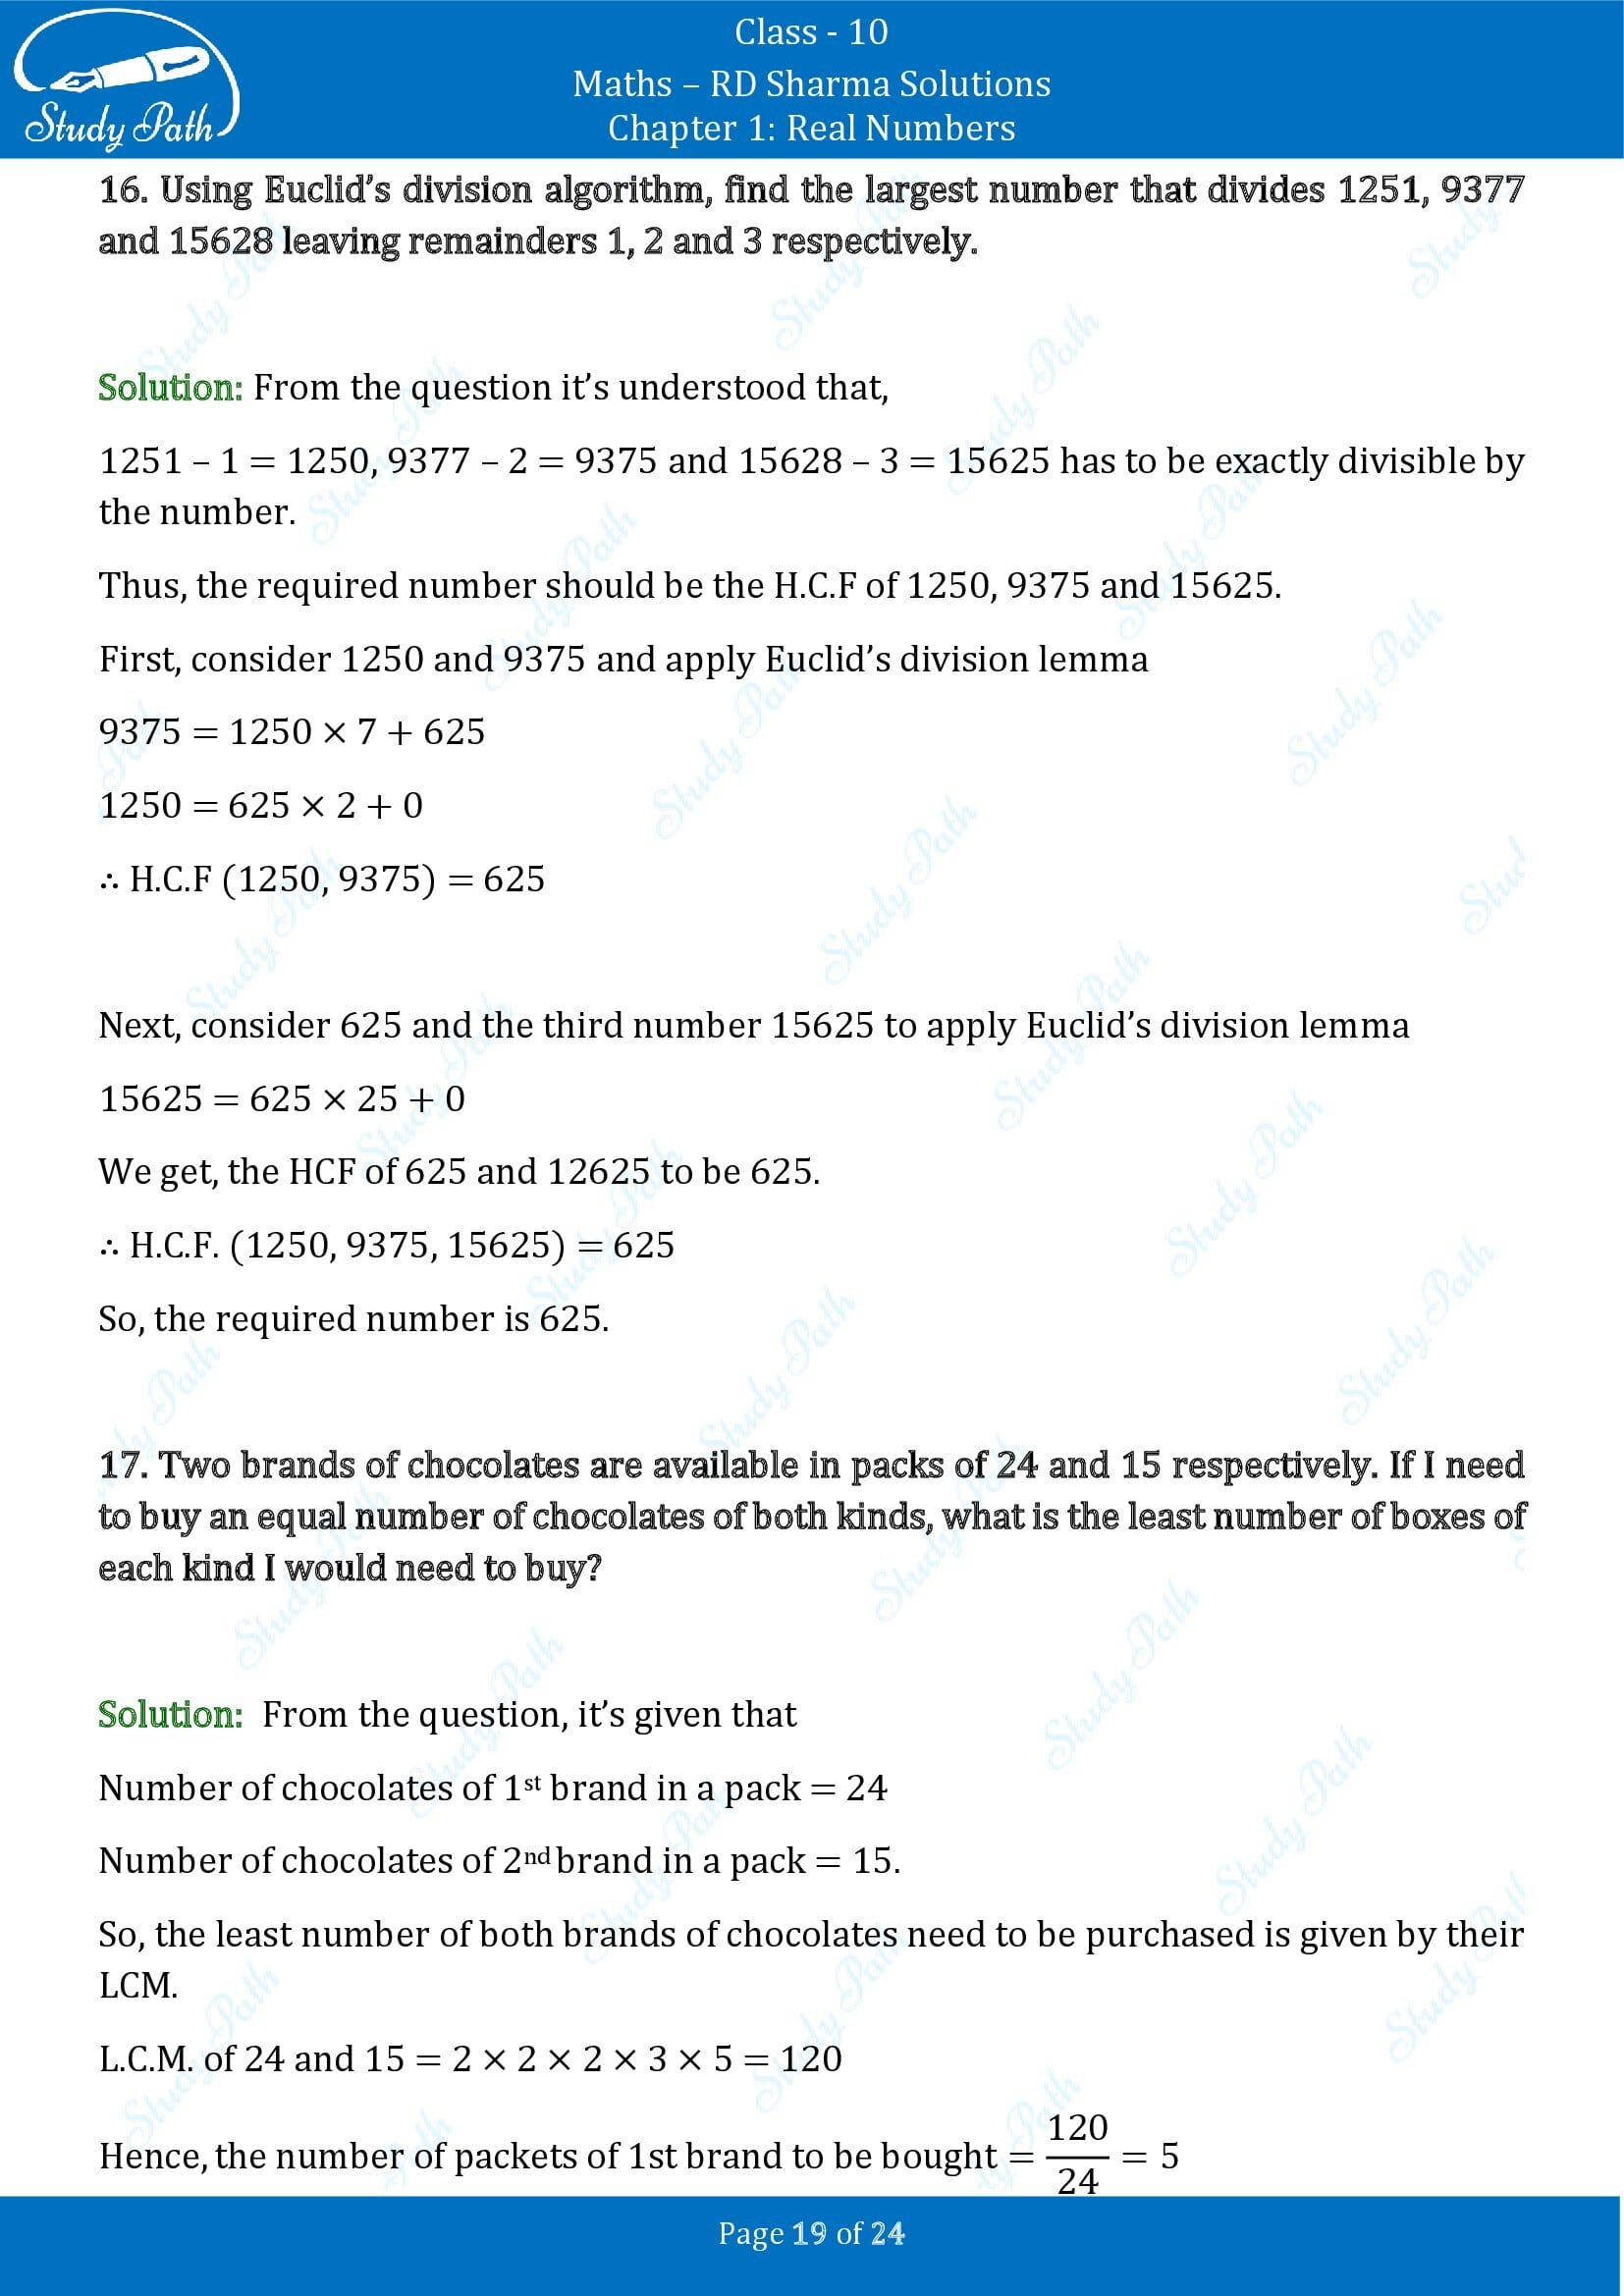 RD Sharma Solutions Class 10 Chapter 1 Real Numbers Exercise 1.2 00019